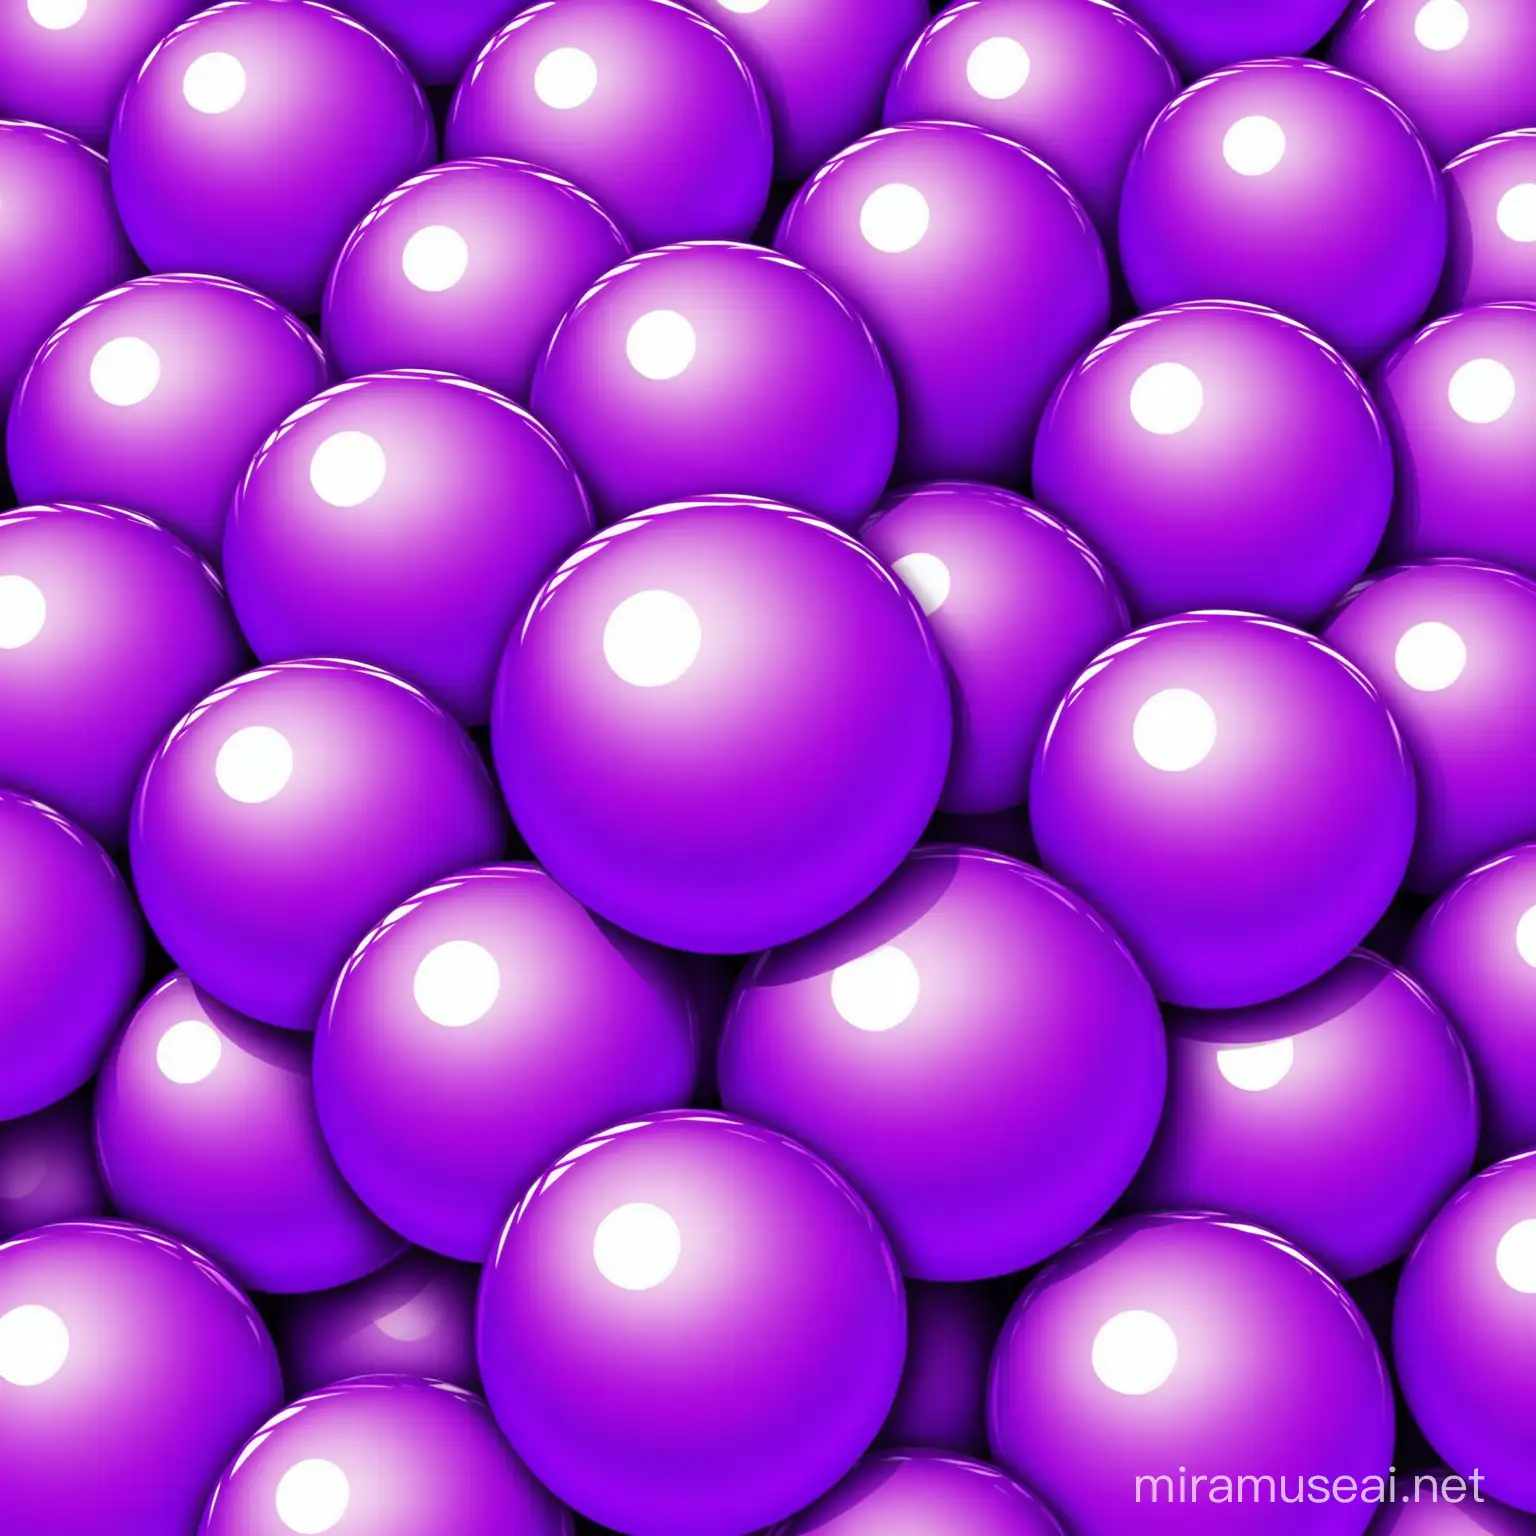 Vibrant Purple Ball Amidst Colorful Chaos